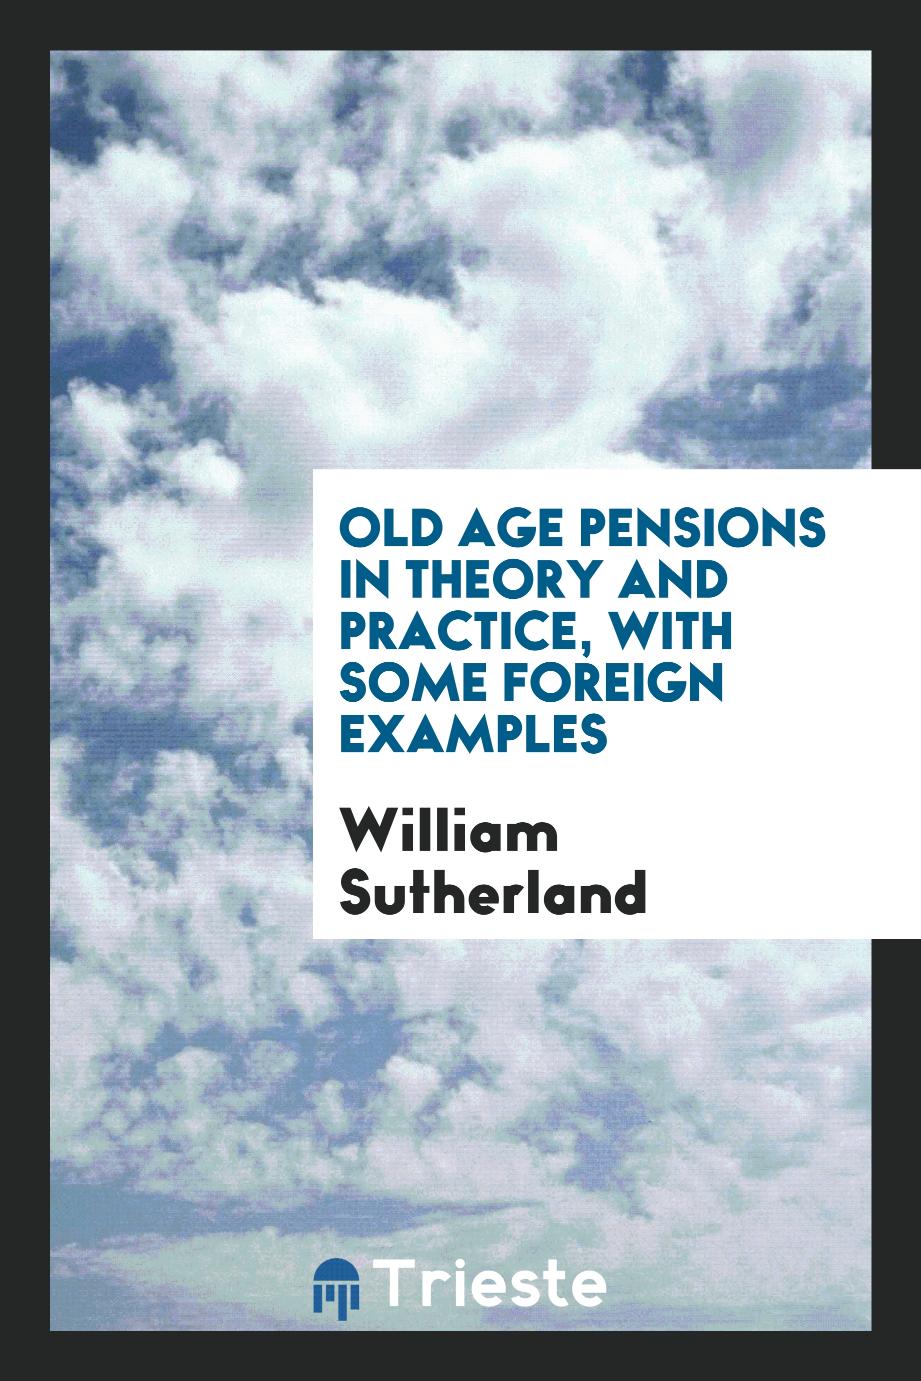 Old age pensions in theory and practice, with some foreign examples